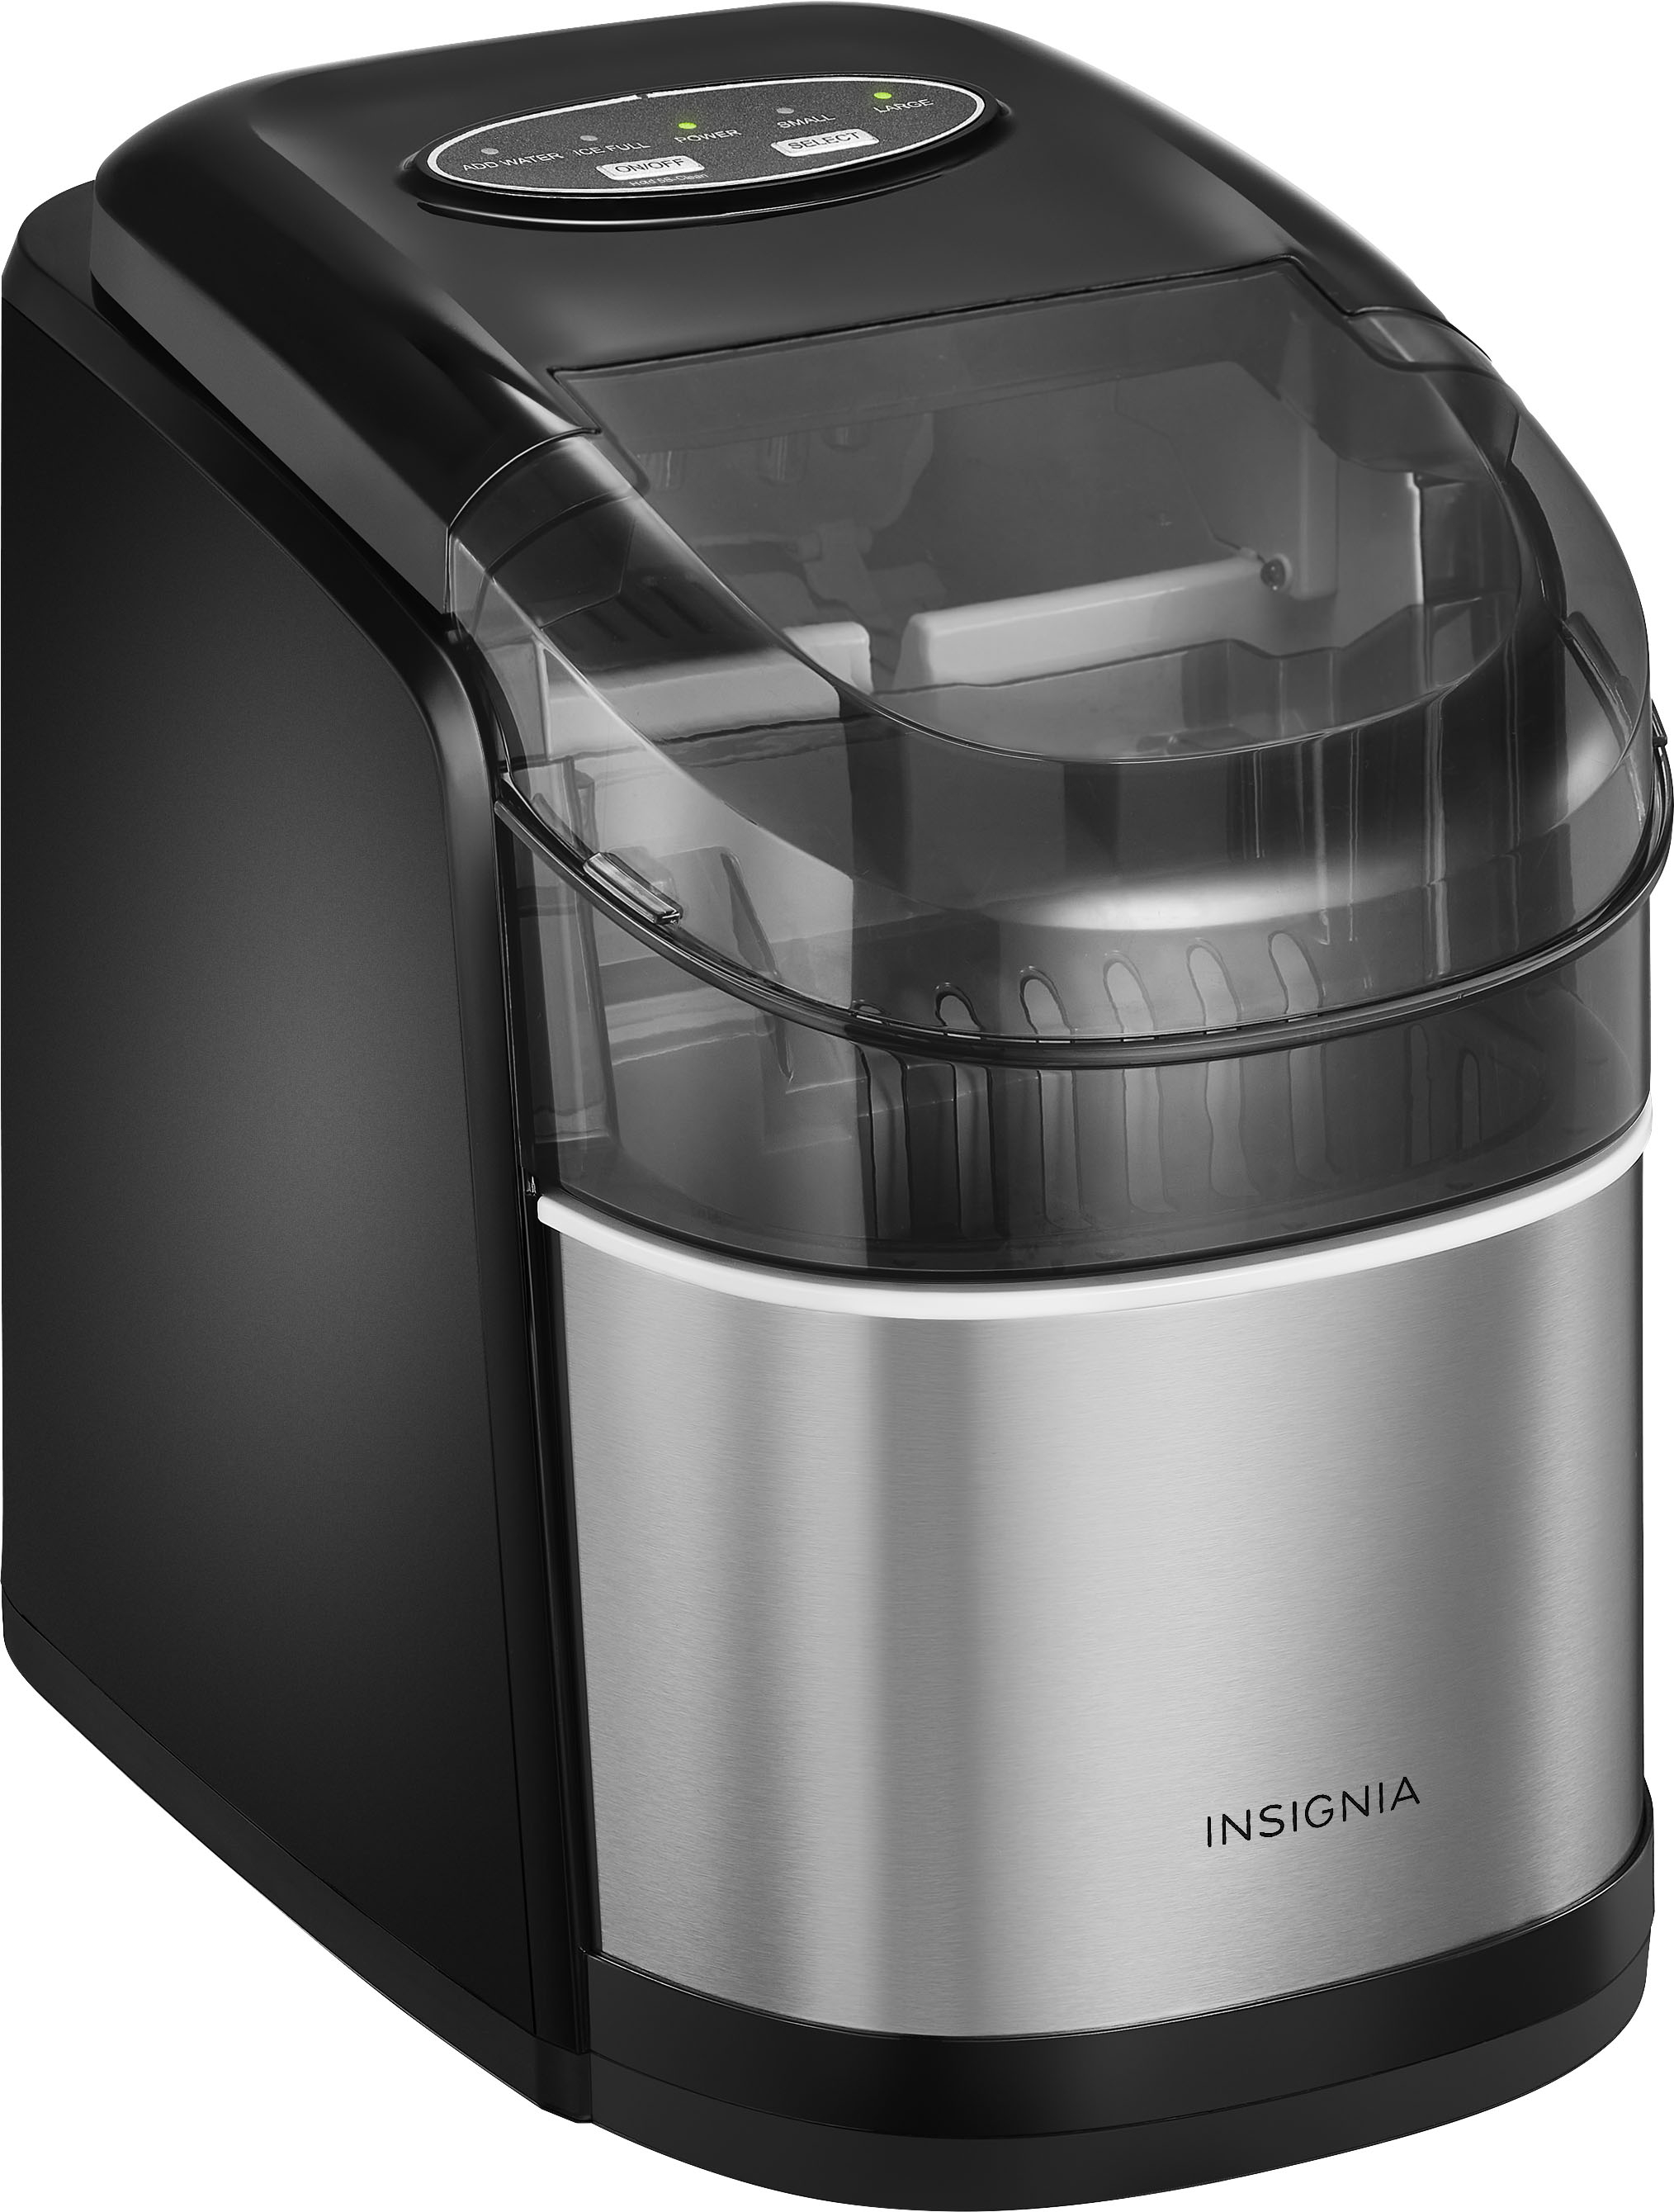 Insignia NS-IMP33SS9 33lbs Portable Ice Maker for sale online